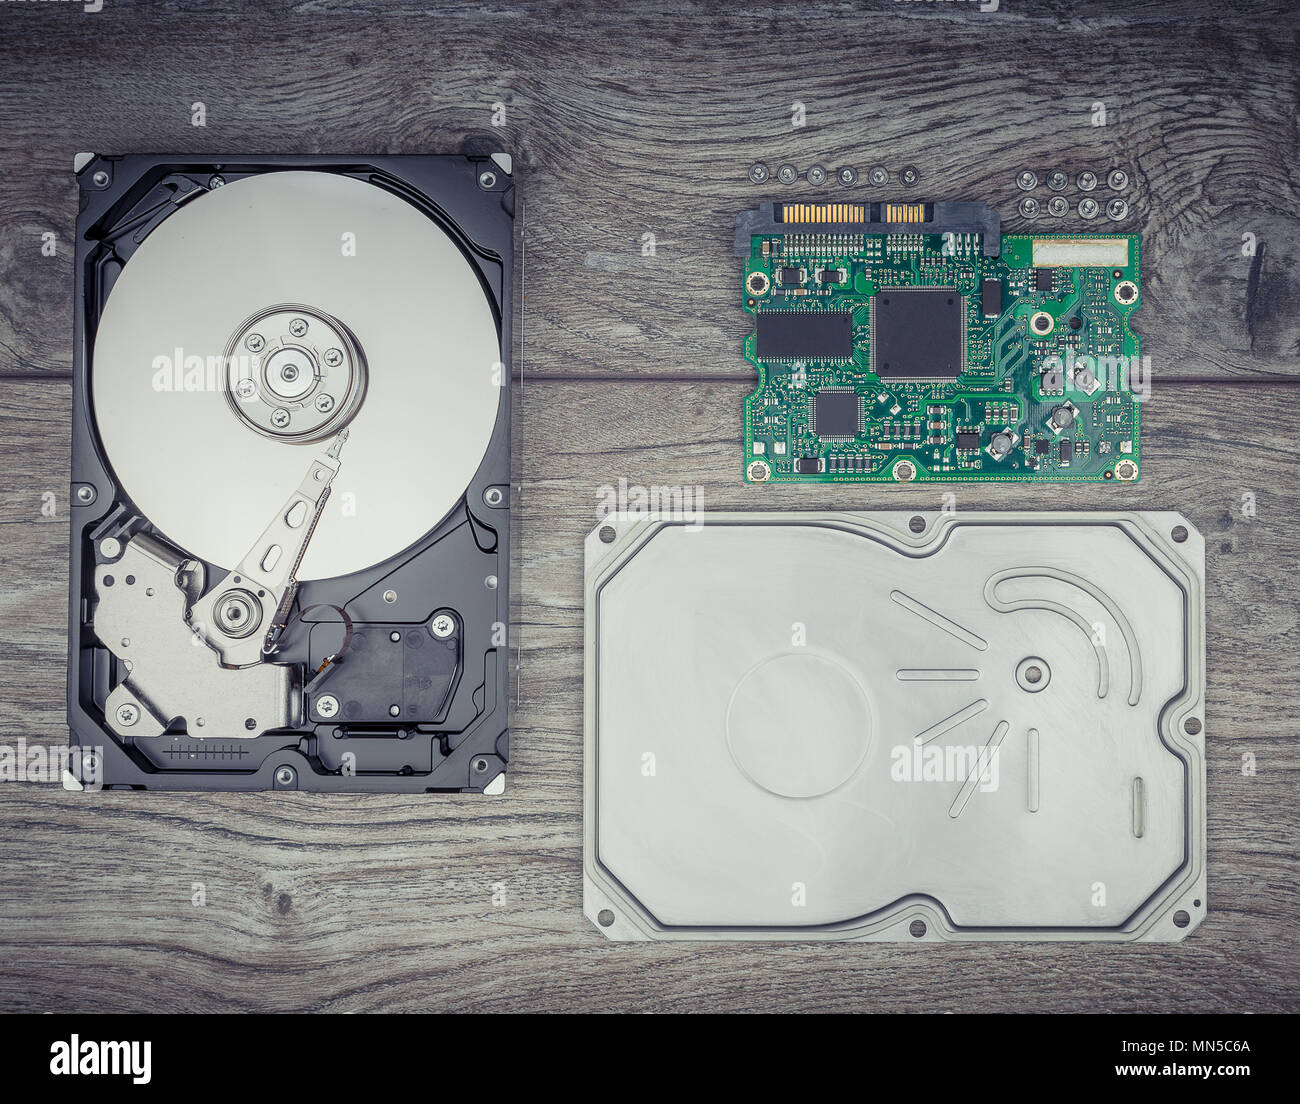 Disassembled Hard drive on wooden table Stock Photo